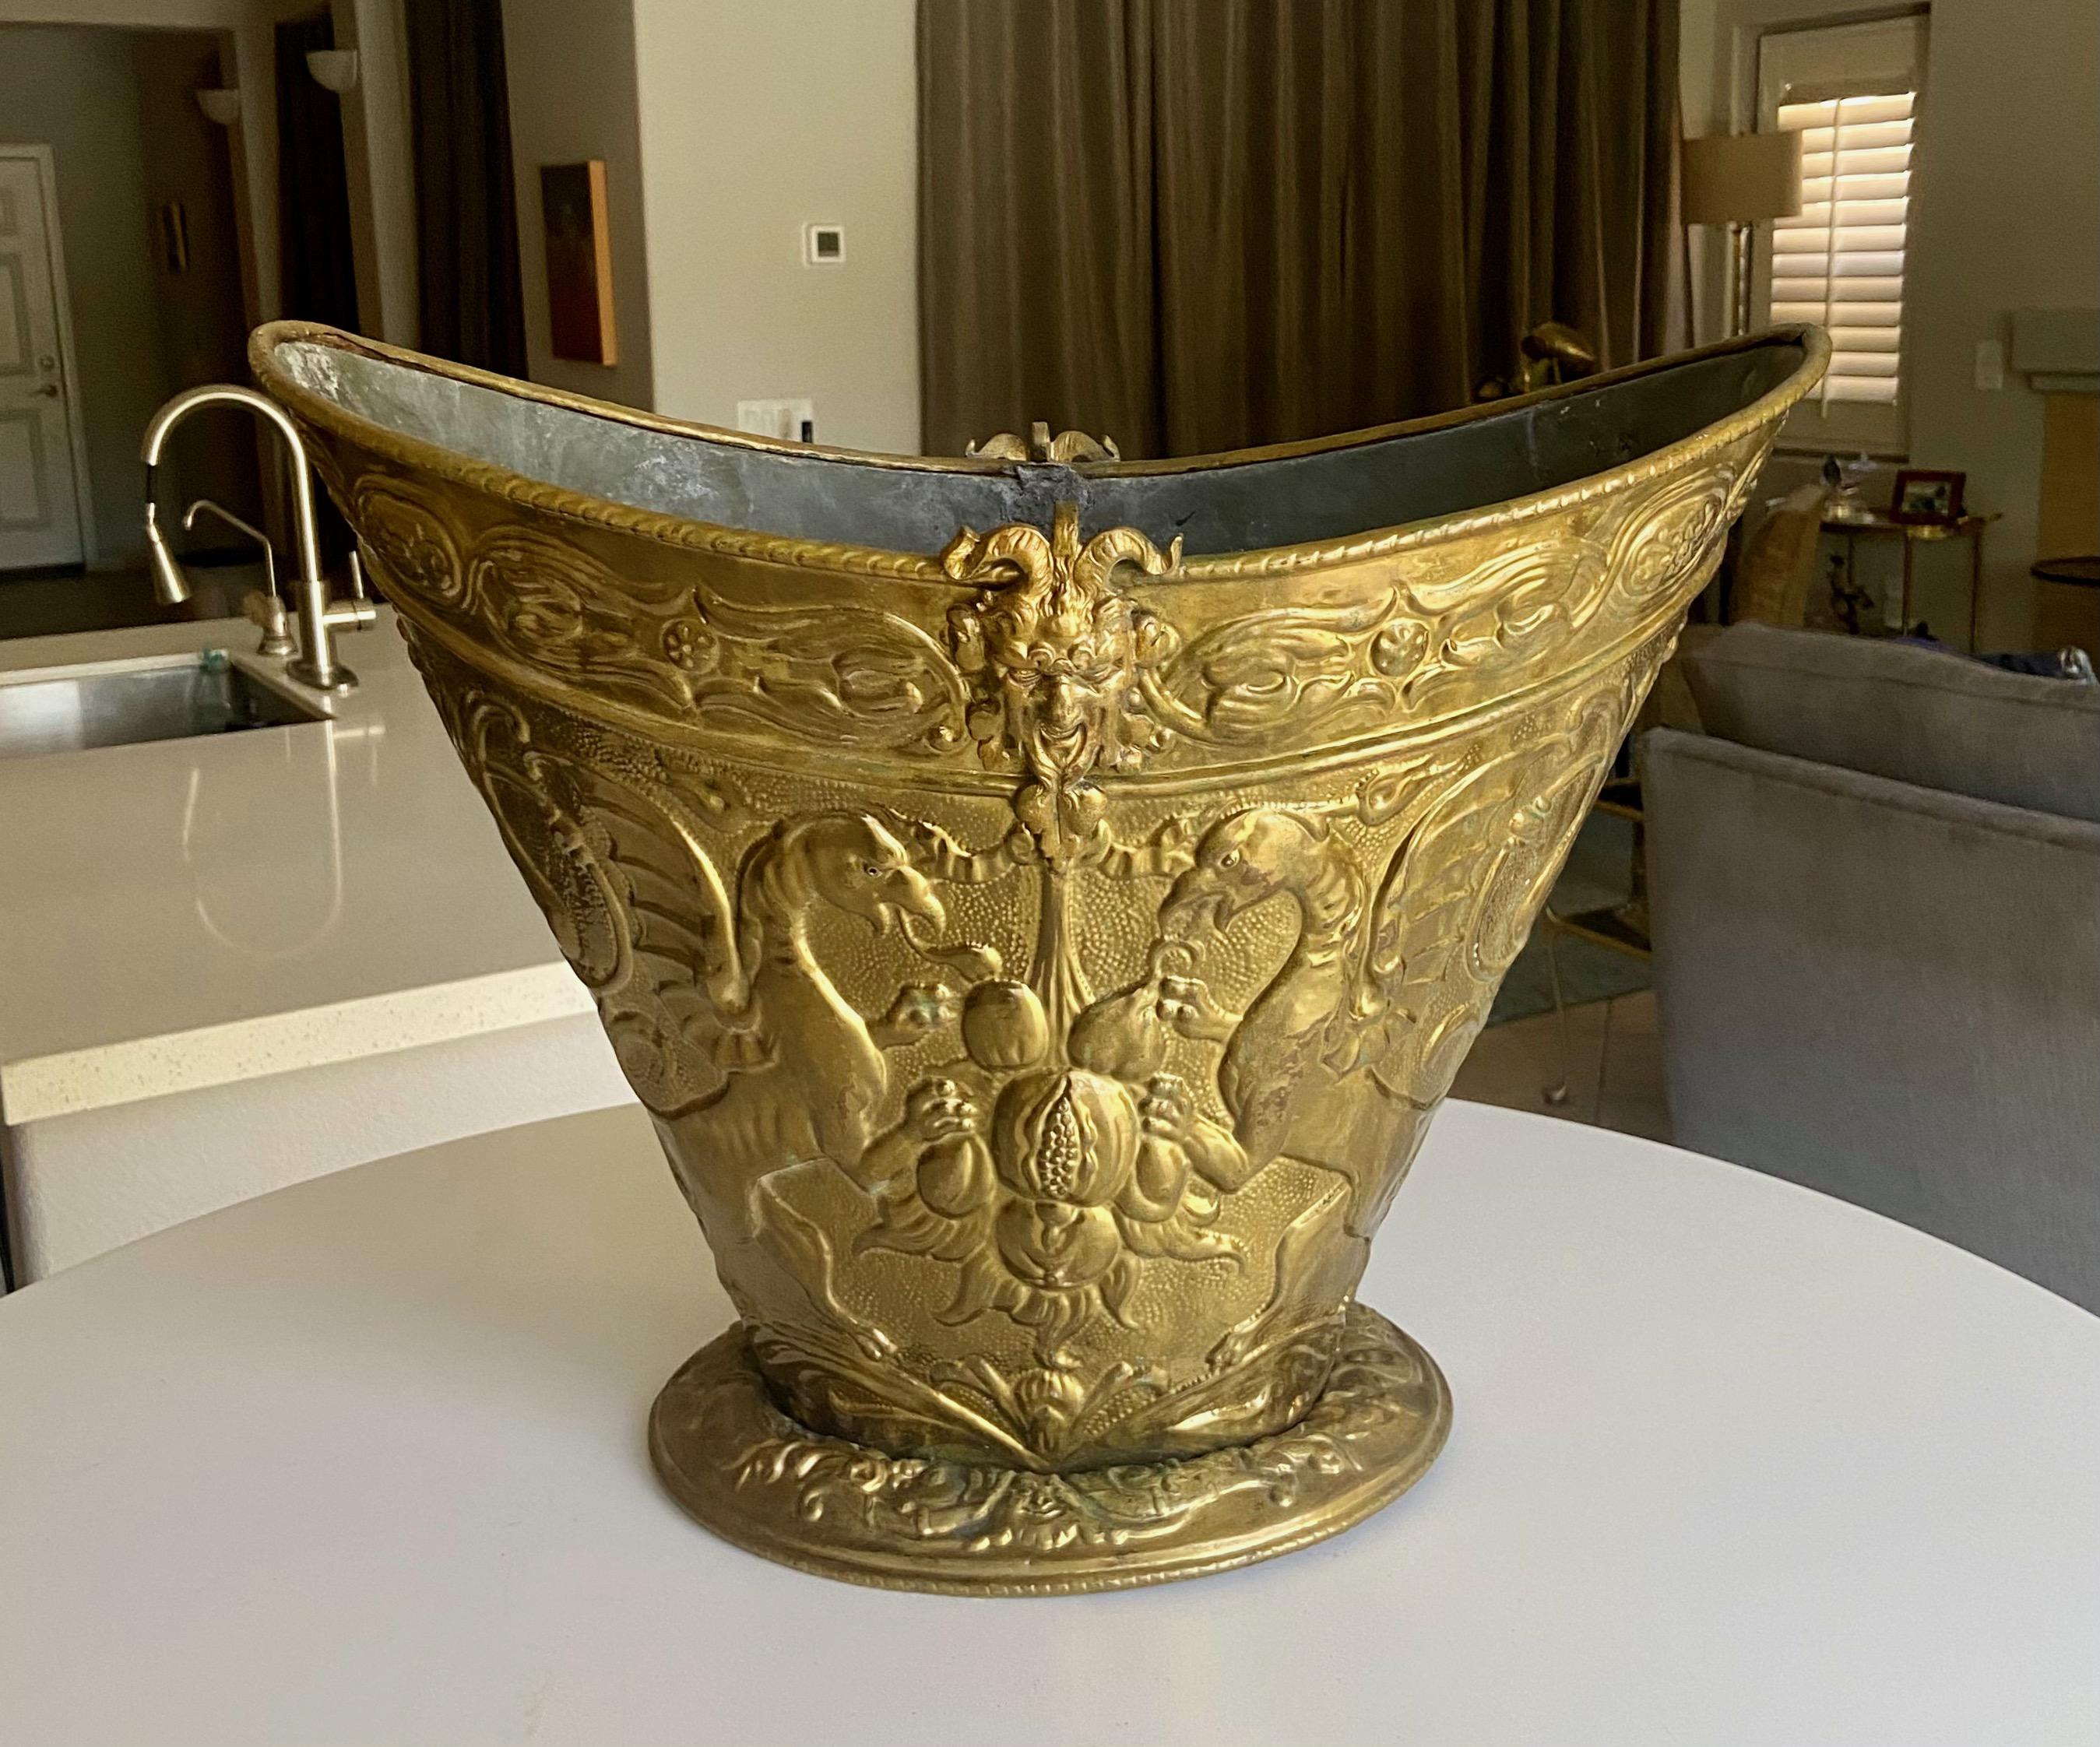 English 19th century Period embossed brass Jardinière or fireplace log bin with Satyr and dragon motif figures. Finely detailing throughout. The interior is lined in lead. No handles. 